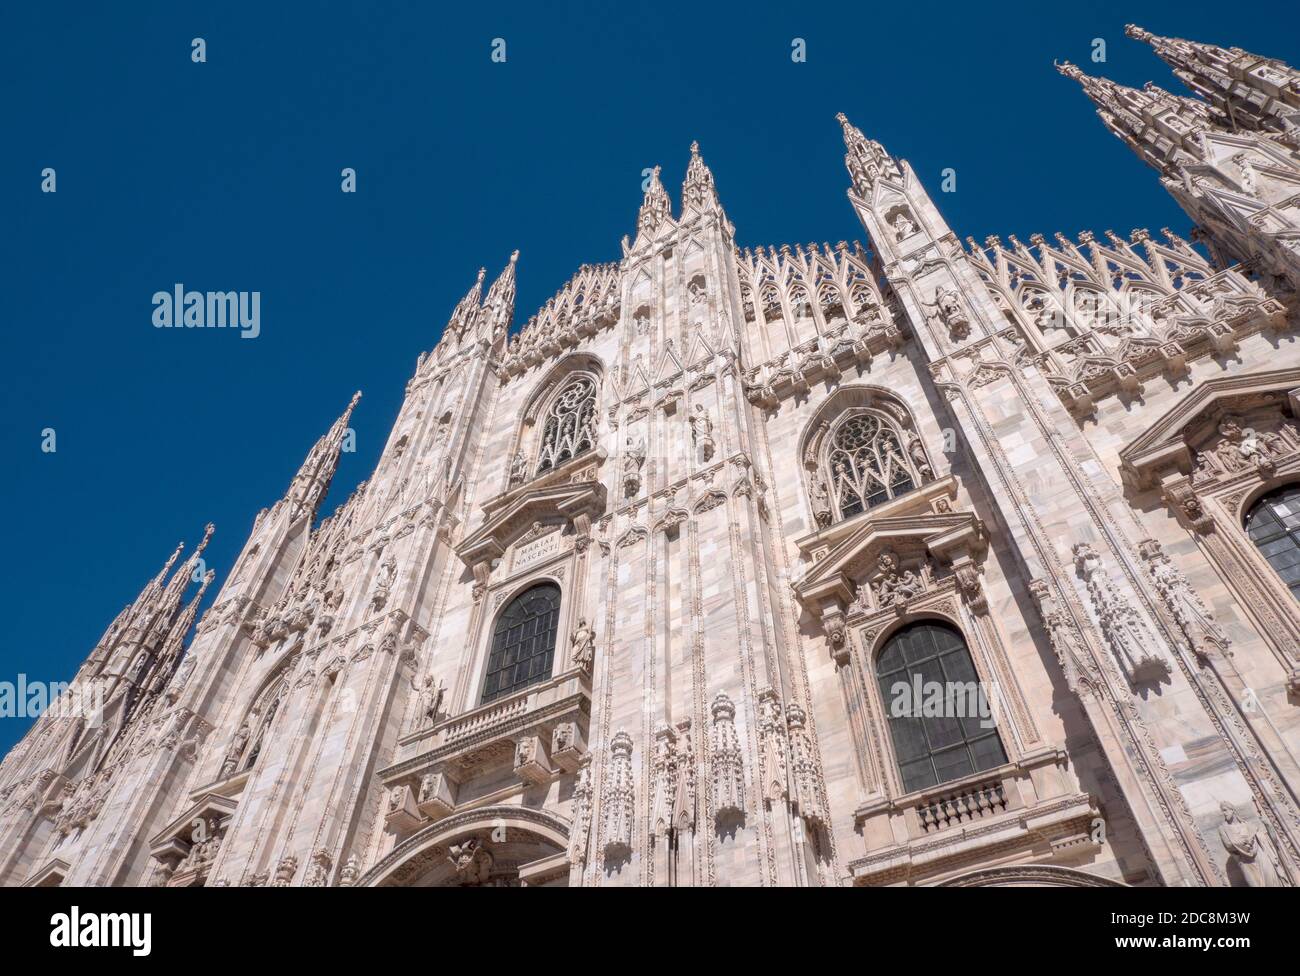 Exterior detail of the west front façade of Milan Cathedral - Duomo di Milano - Milan, Lombardy, Italy. Stock Photo